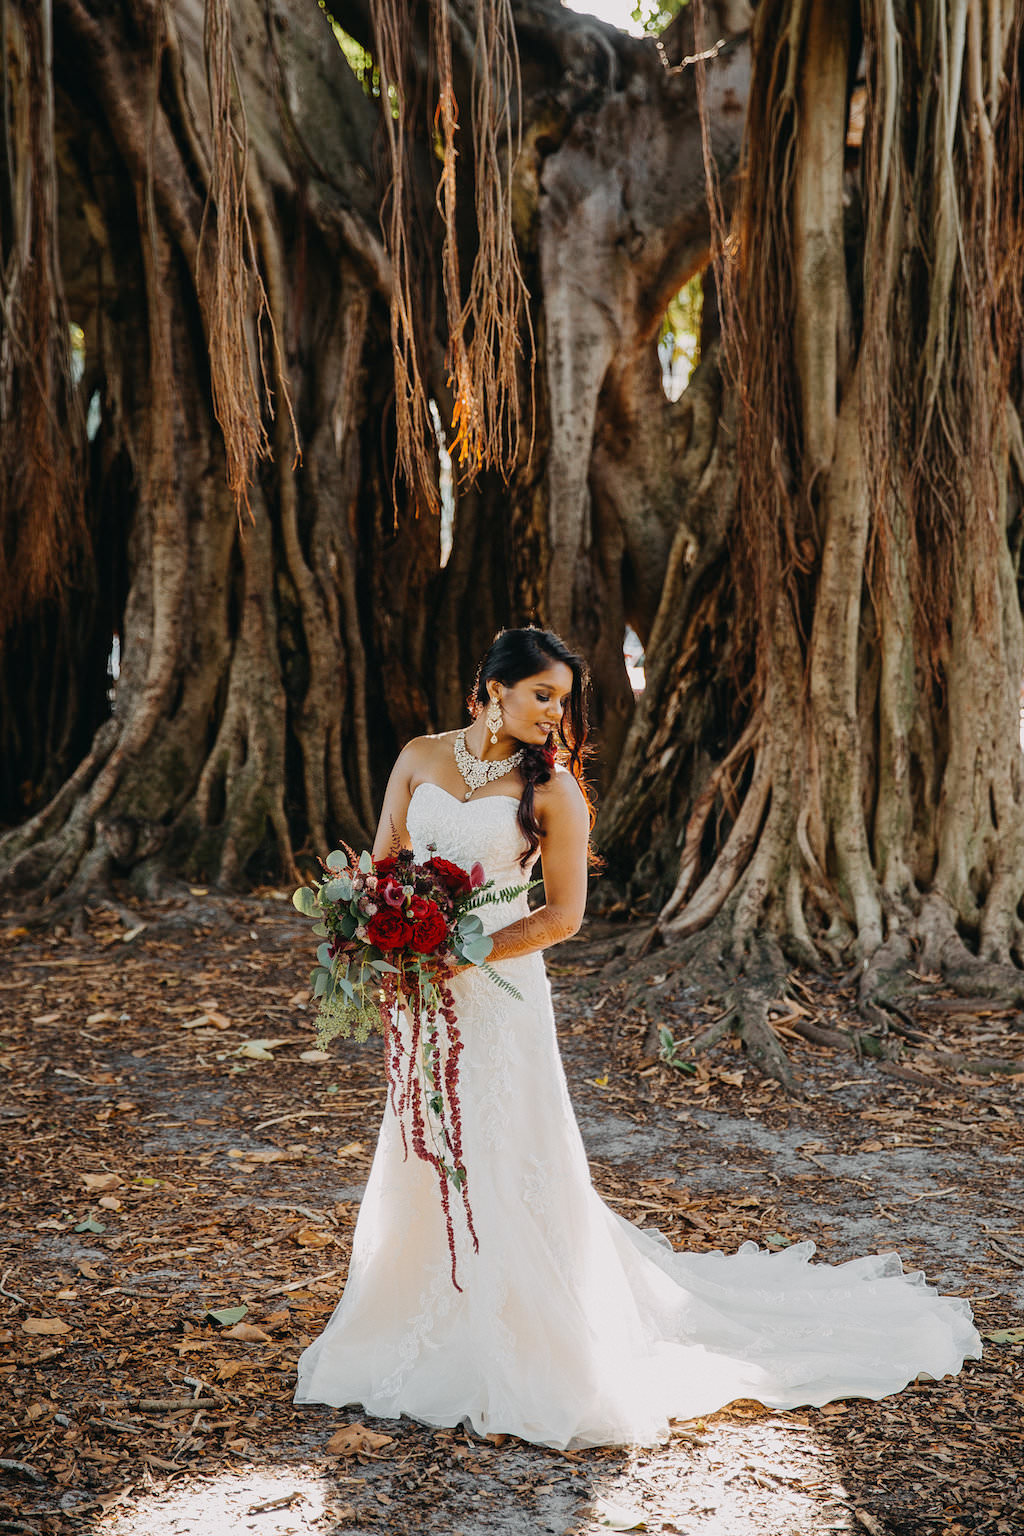 Modern Indian Bride Wedding Portrait Under Banyan Tree with Strapless A Line Davids Bridal Dress, Red Hanging Floral with Greenery Bouquet | St Pete Wedding Photographer Rad Red Creative